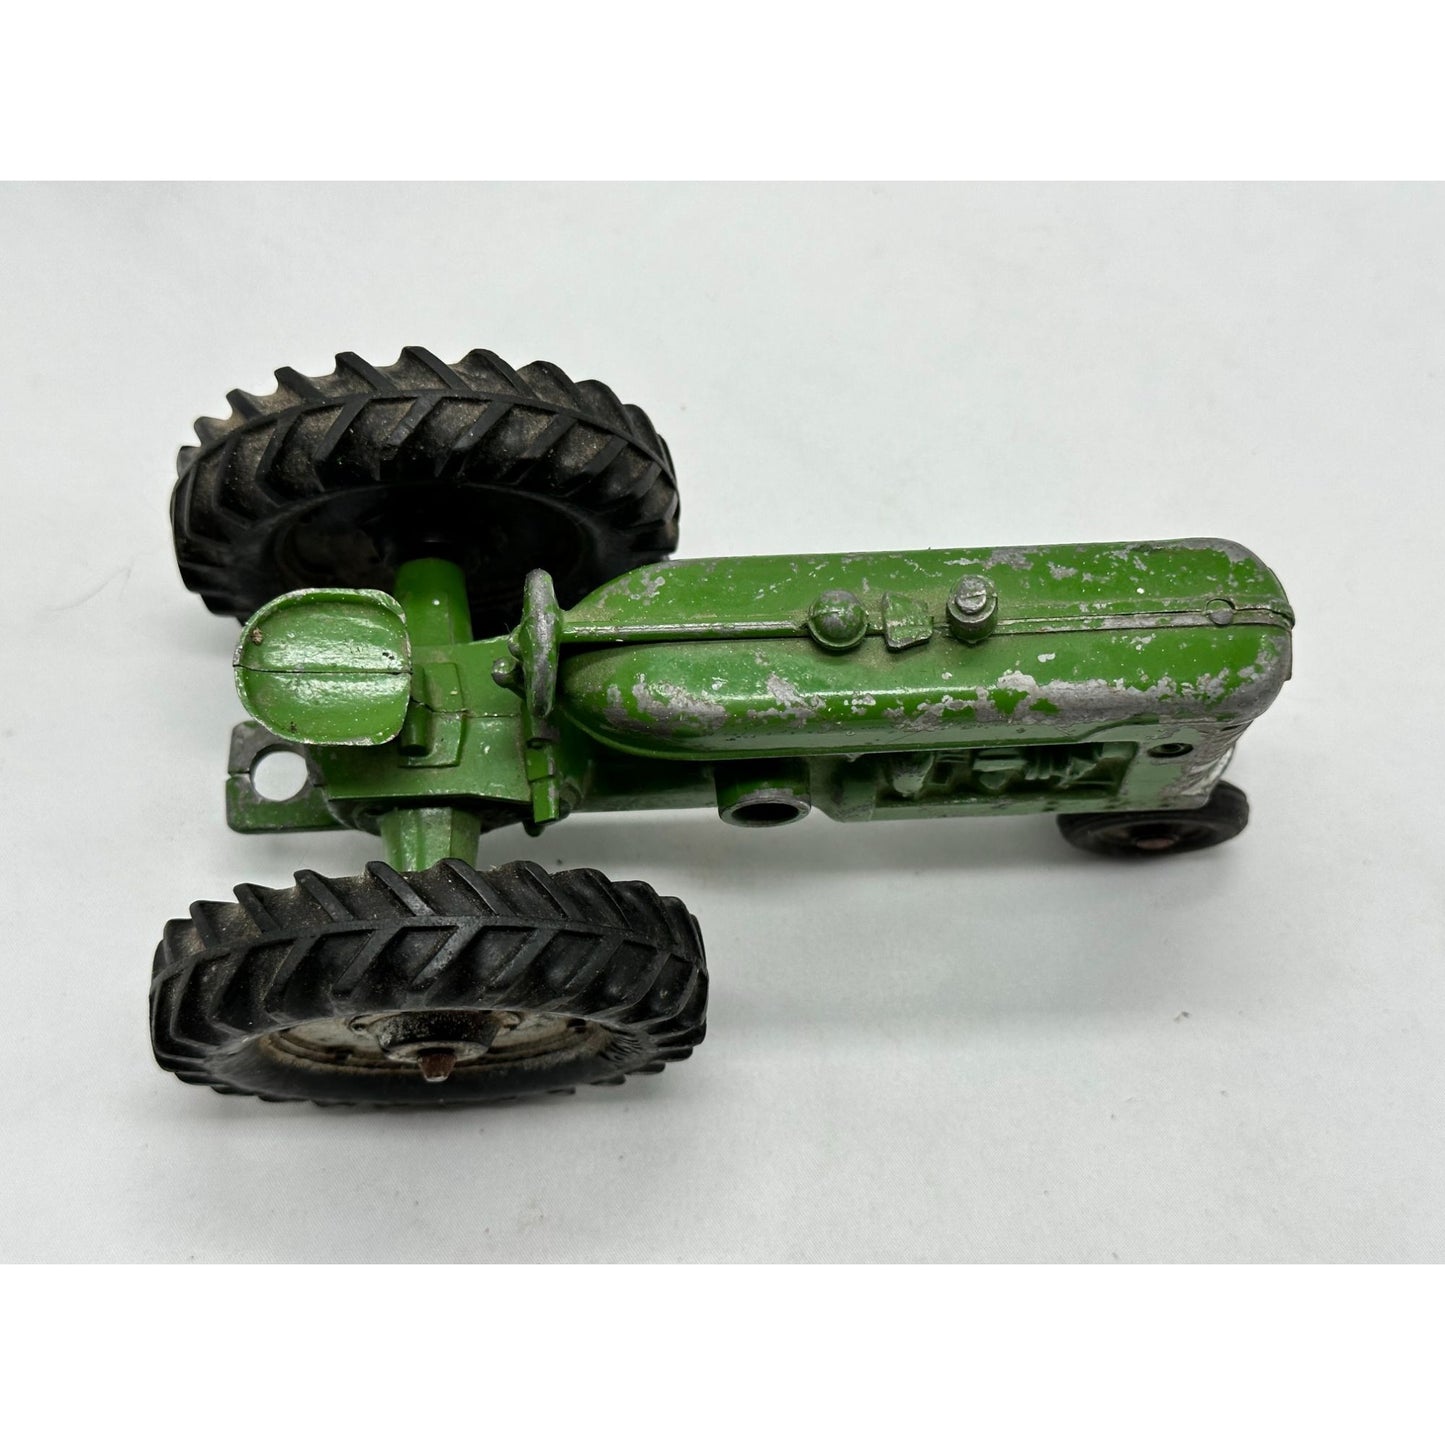 Antique Vintage Diecast Metal Green Farm Tractor Toy Collectible Rare Find